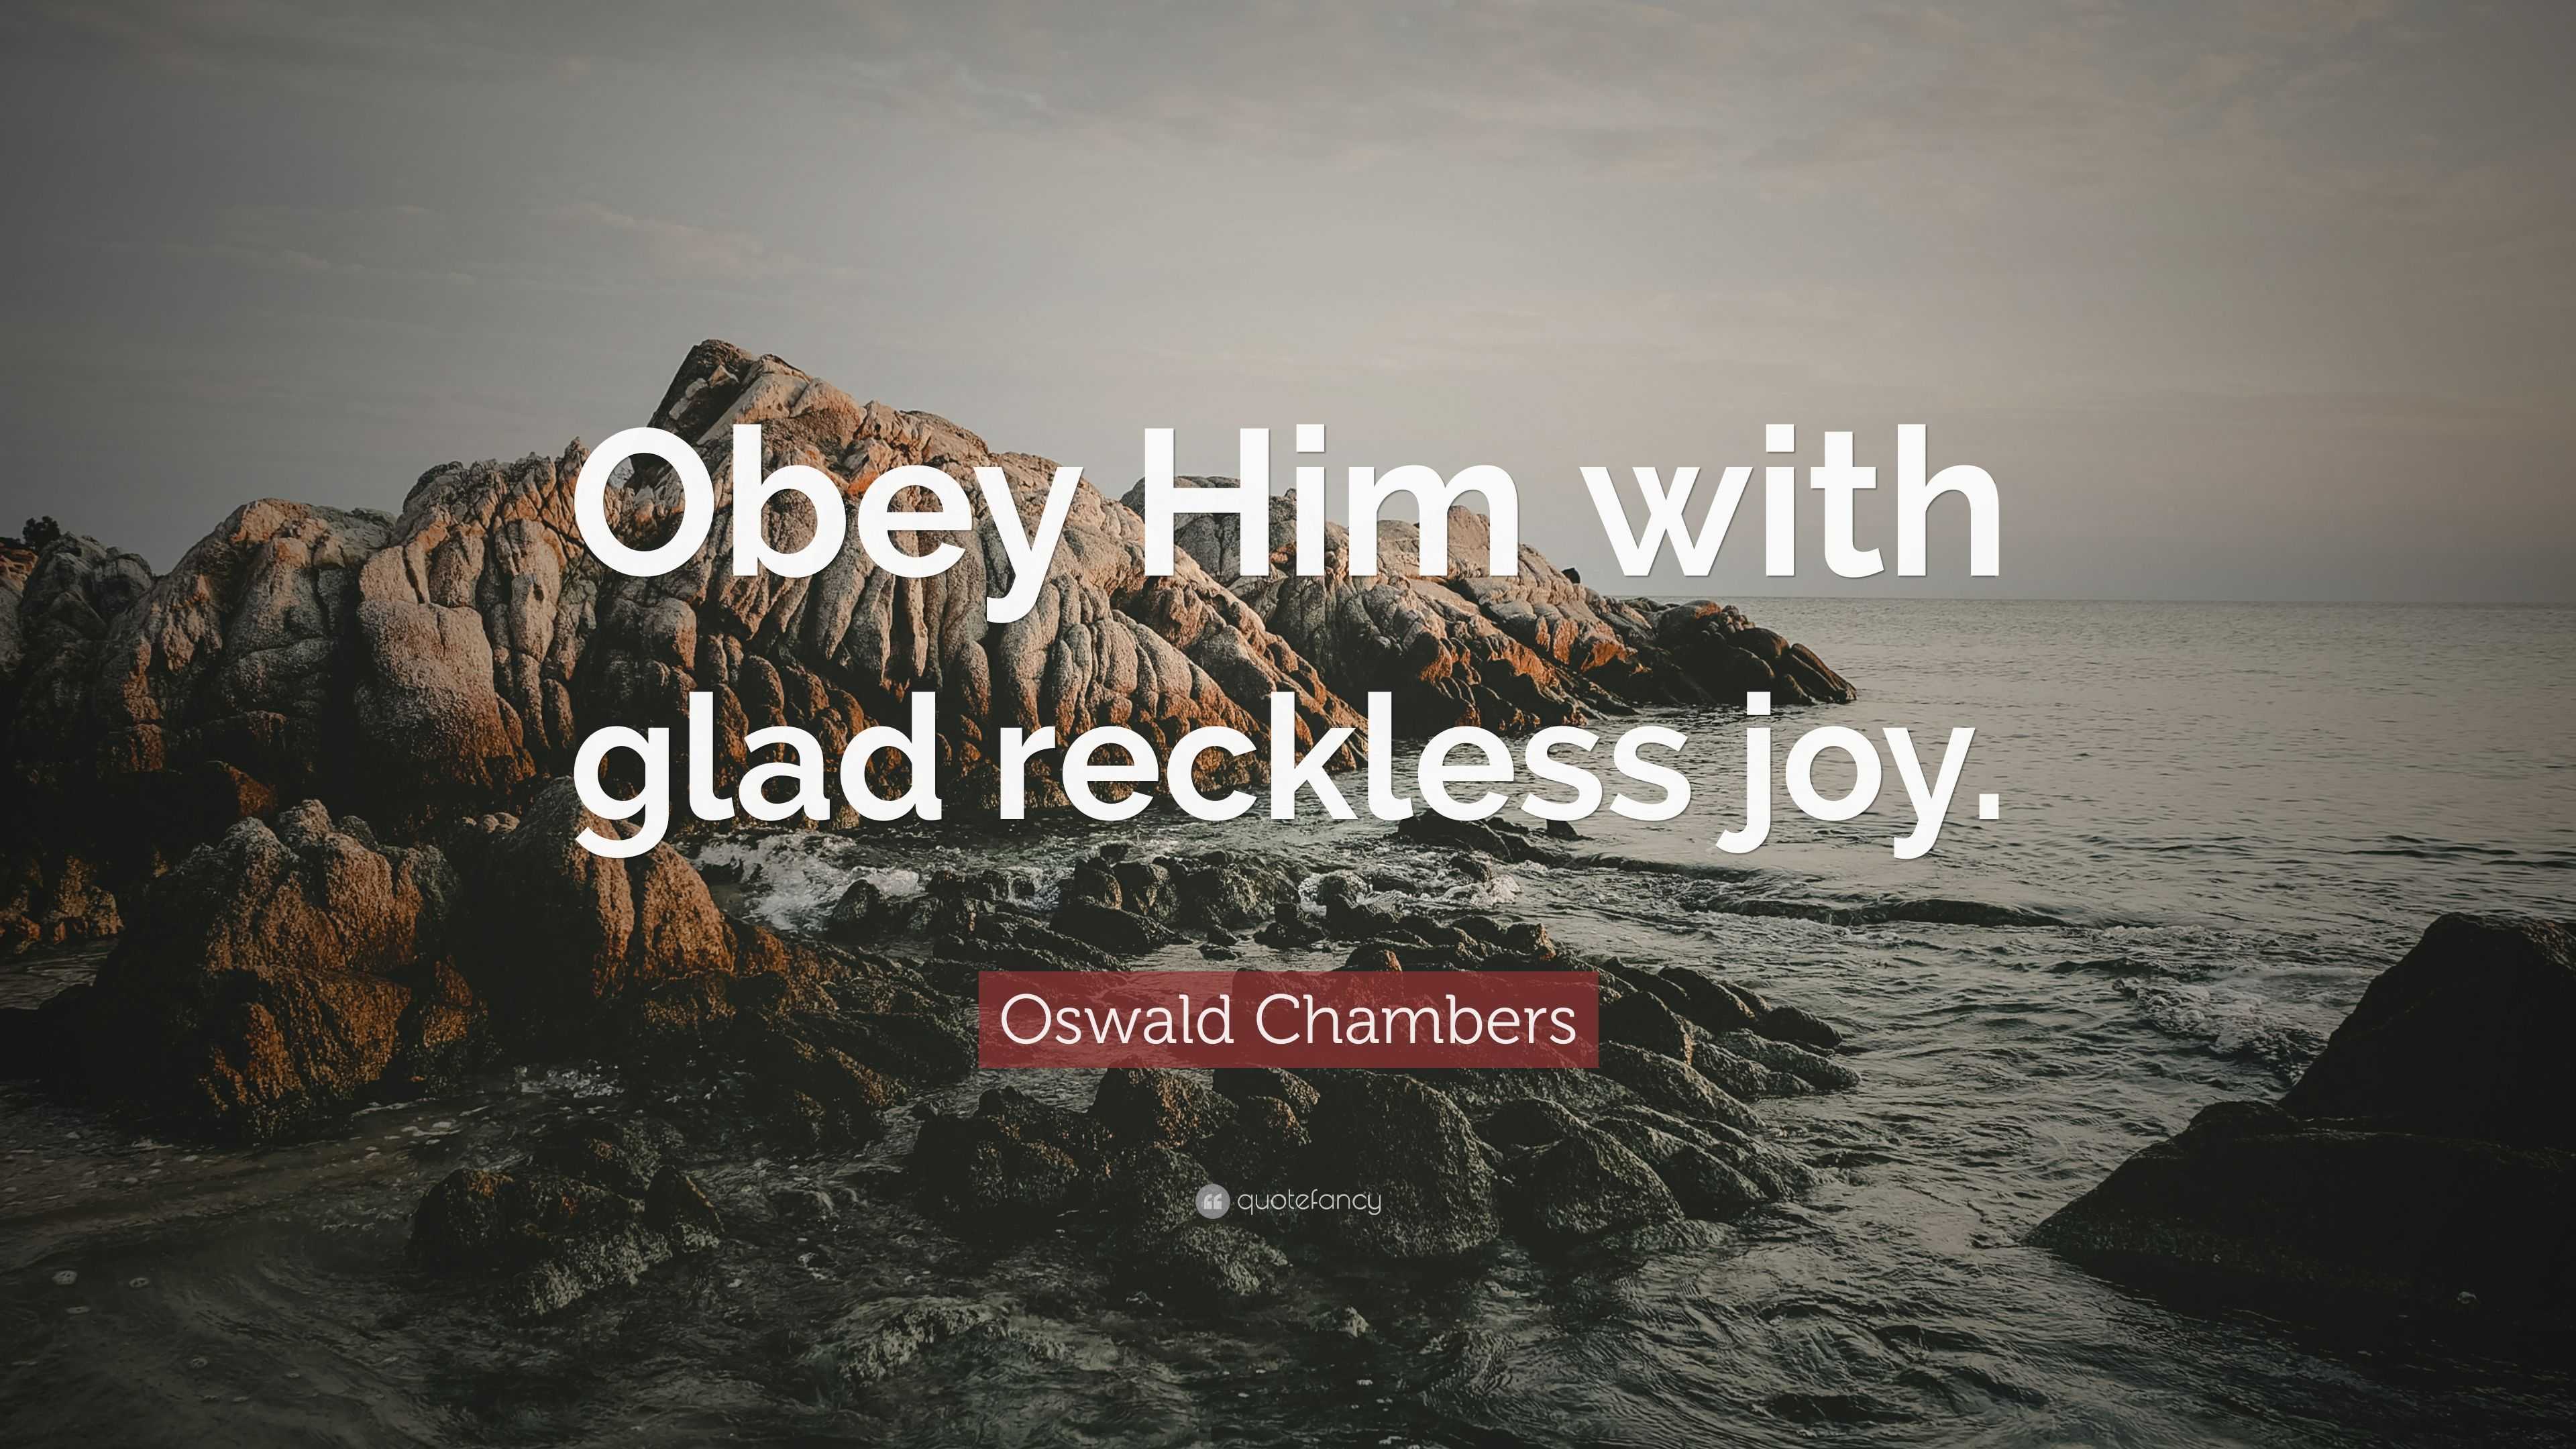 2379144 Oswald Chambers Quote Obey Him with glad reckless joy